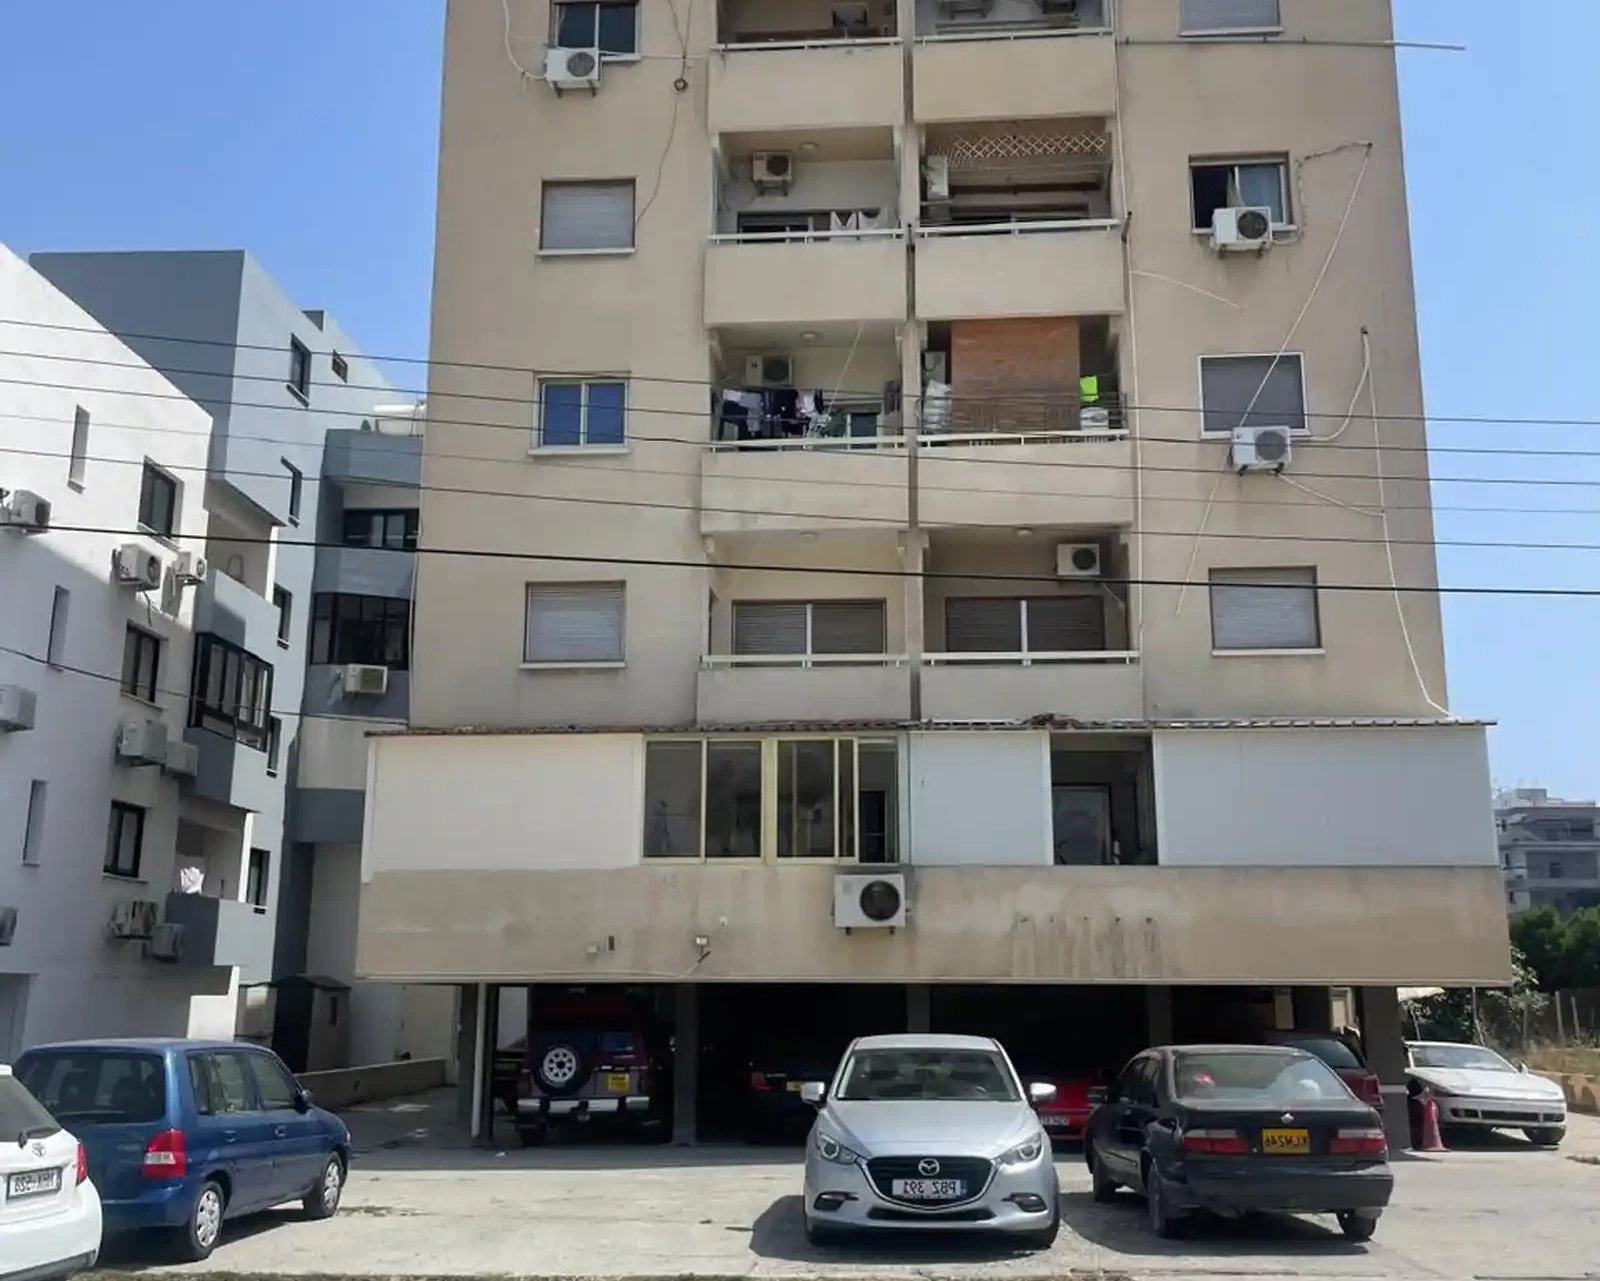 2-bedroom apartment fоr sаle €120.000, image 1